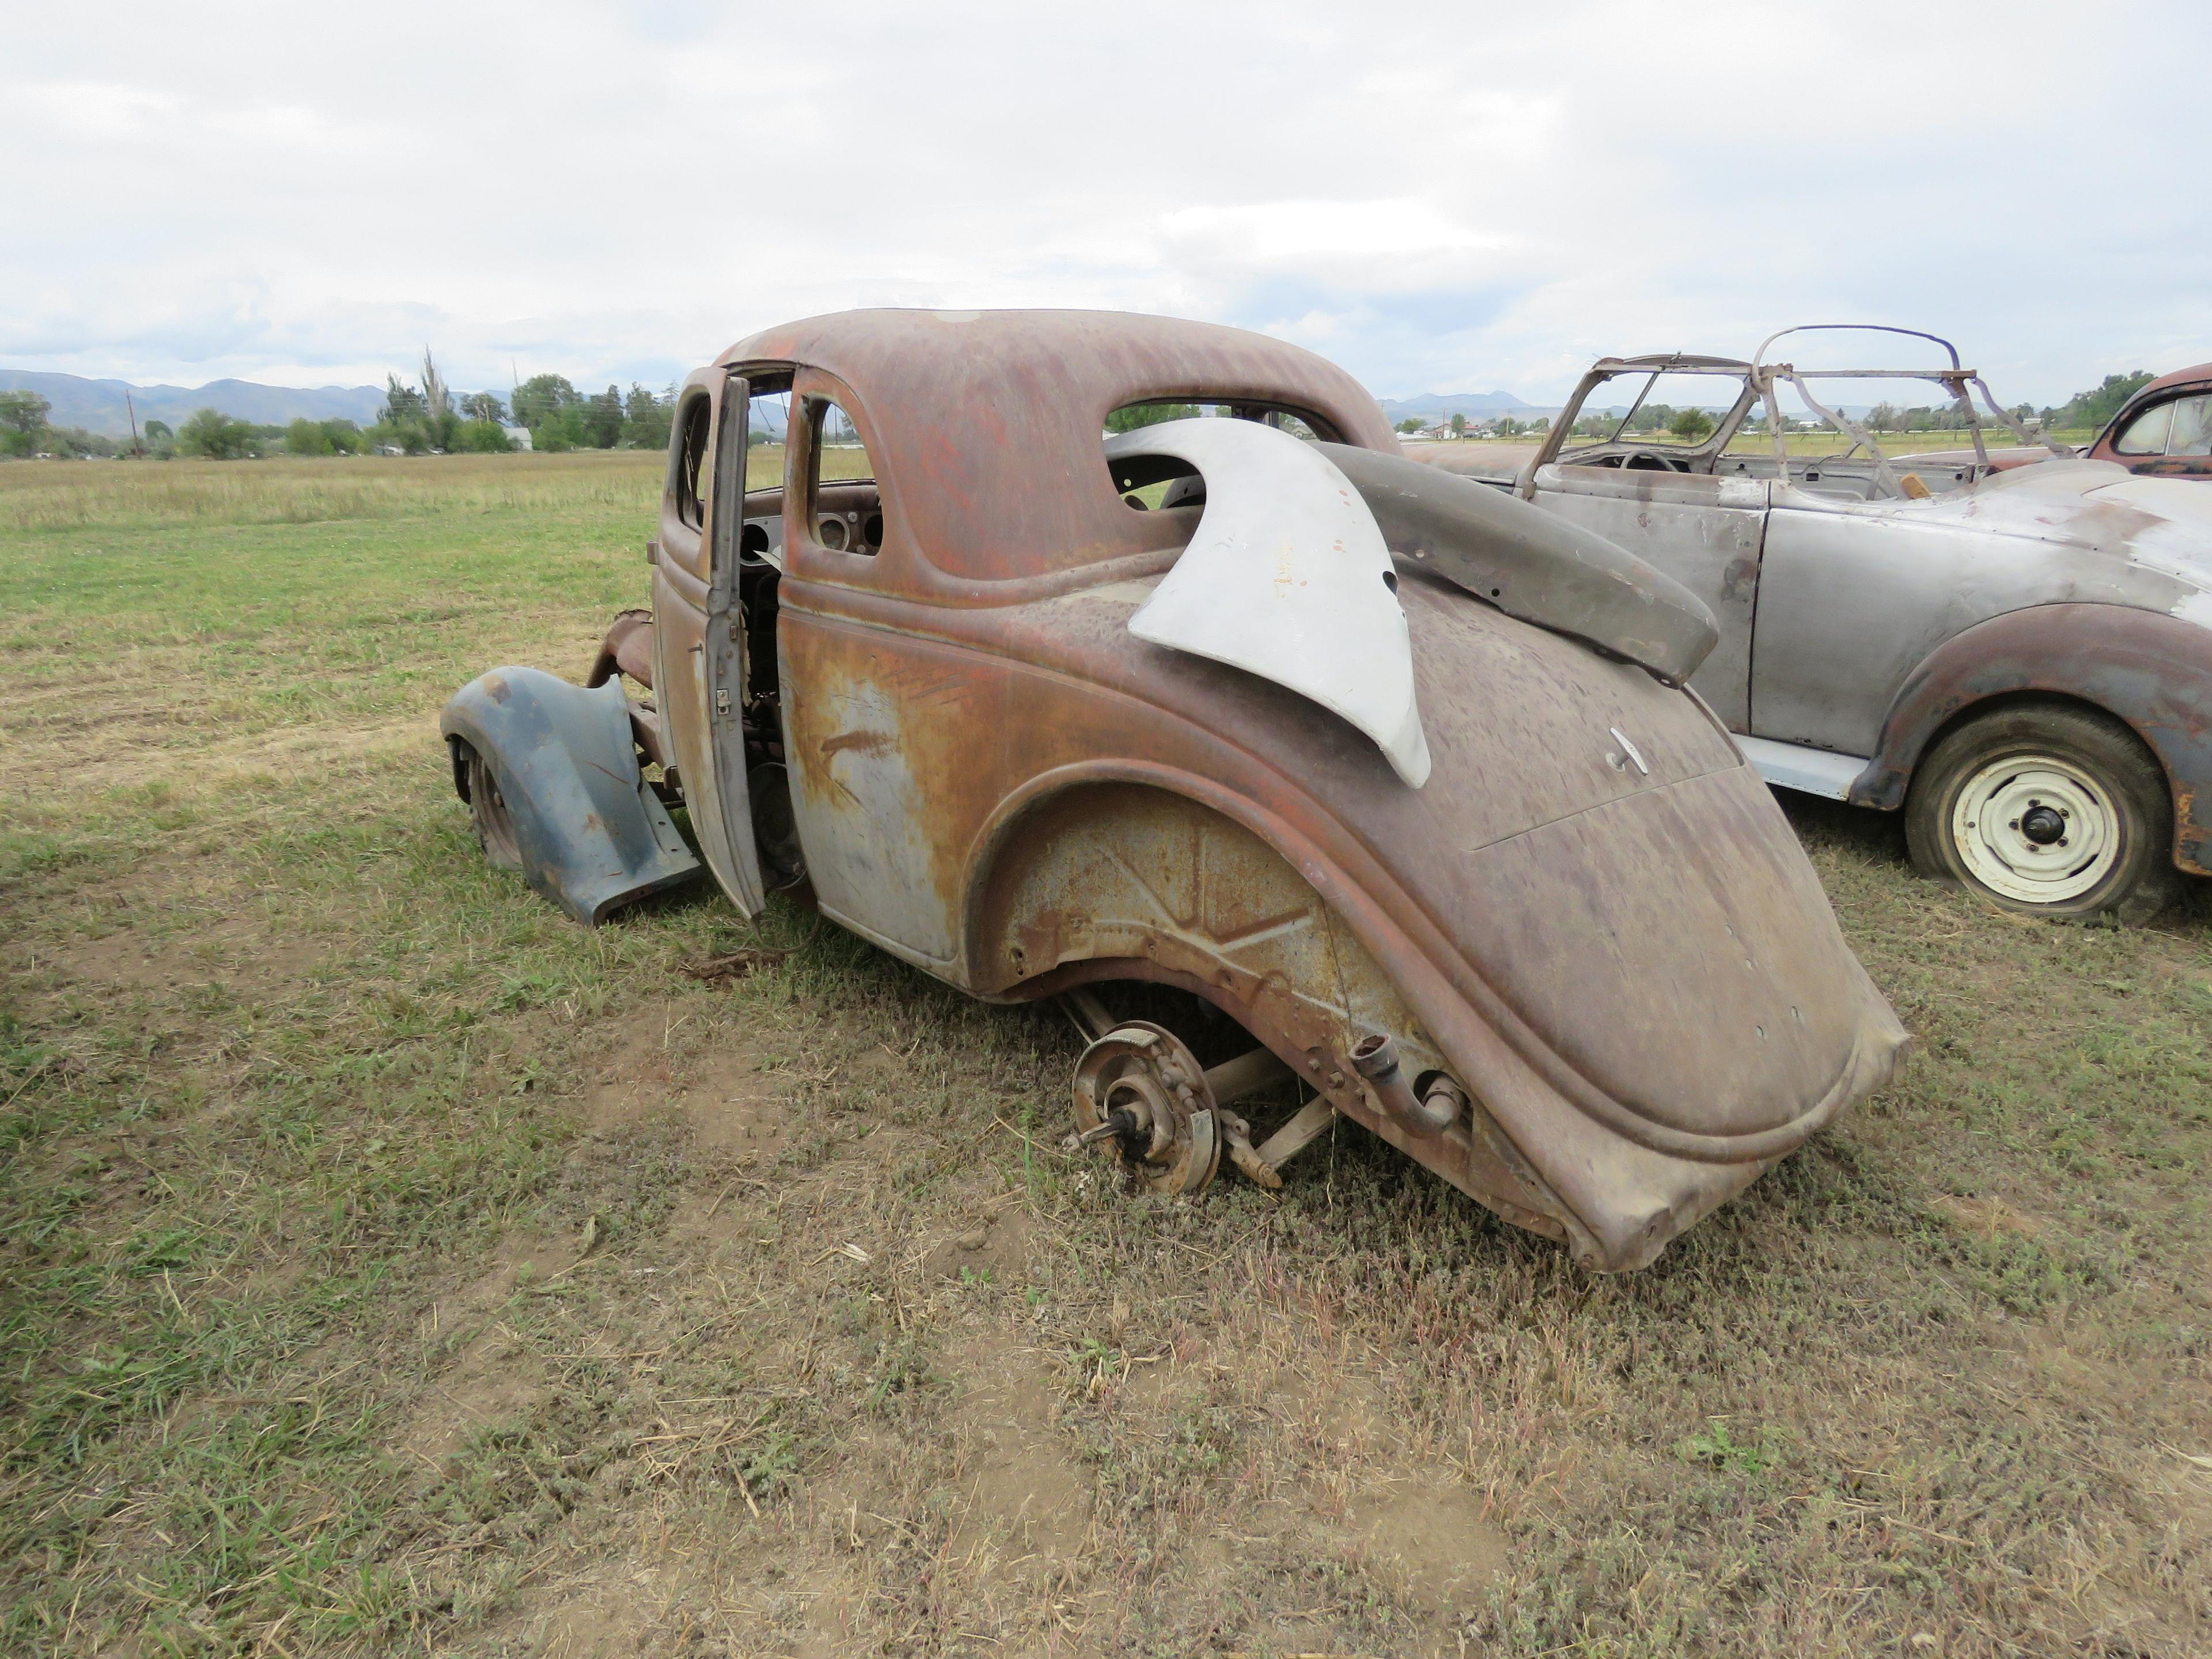 1936 Ford Coupe for Rod or Restore